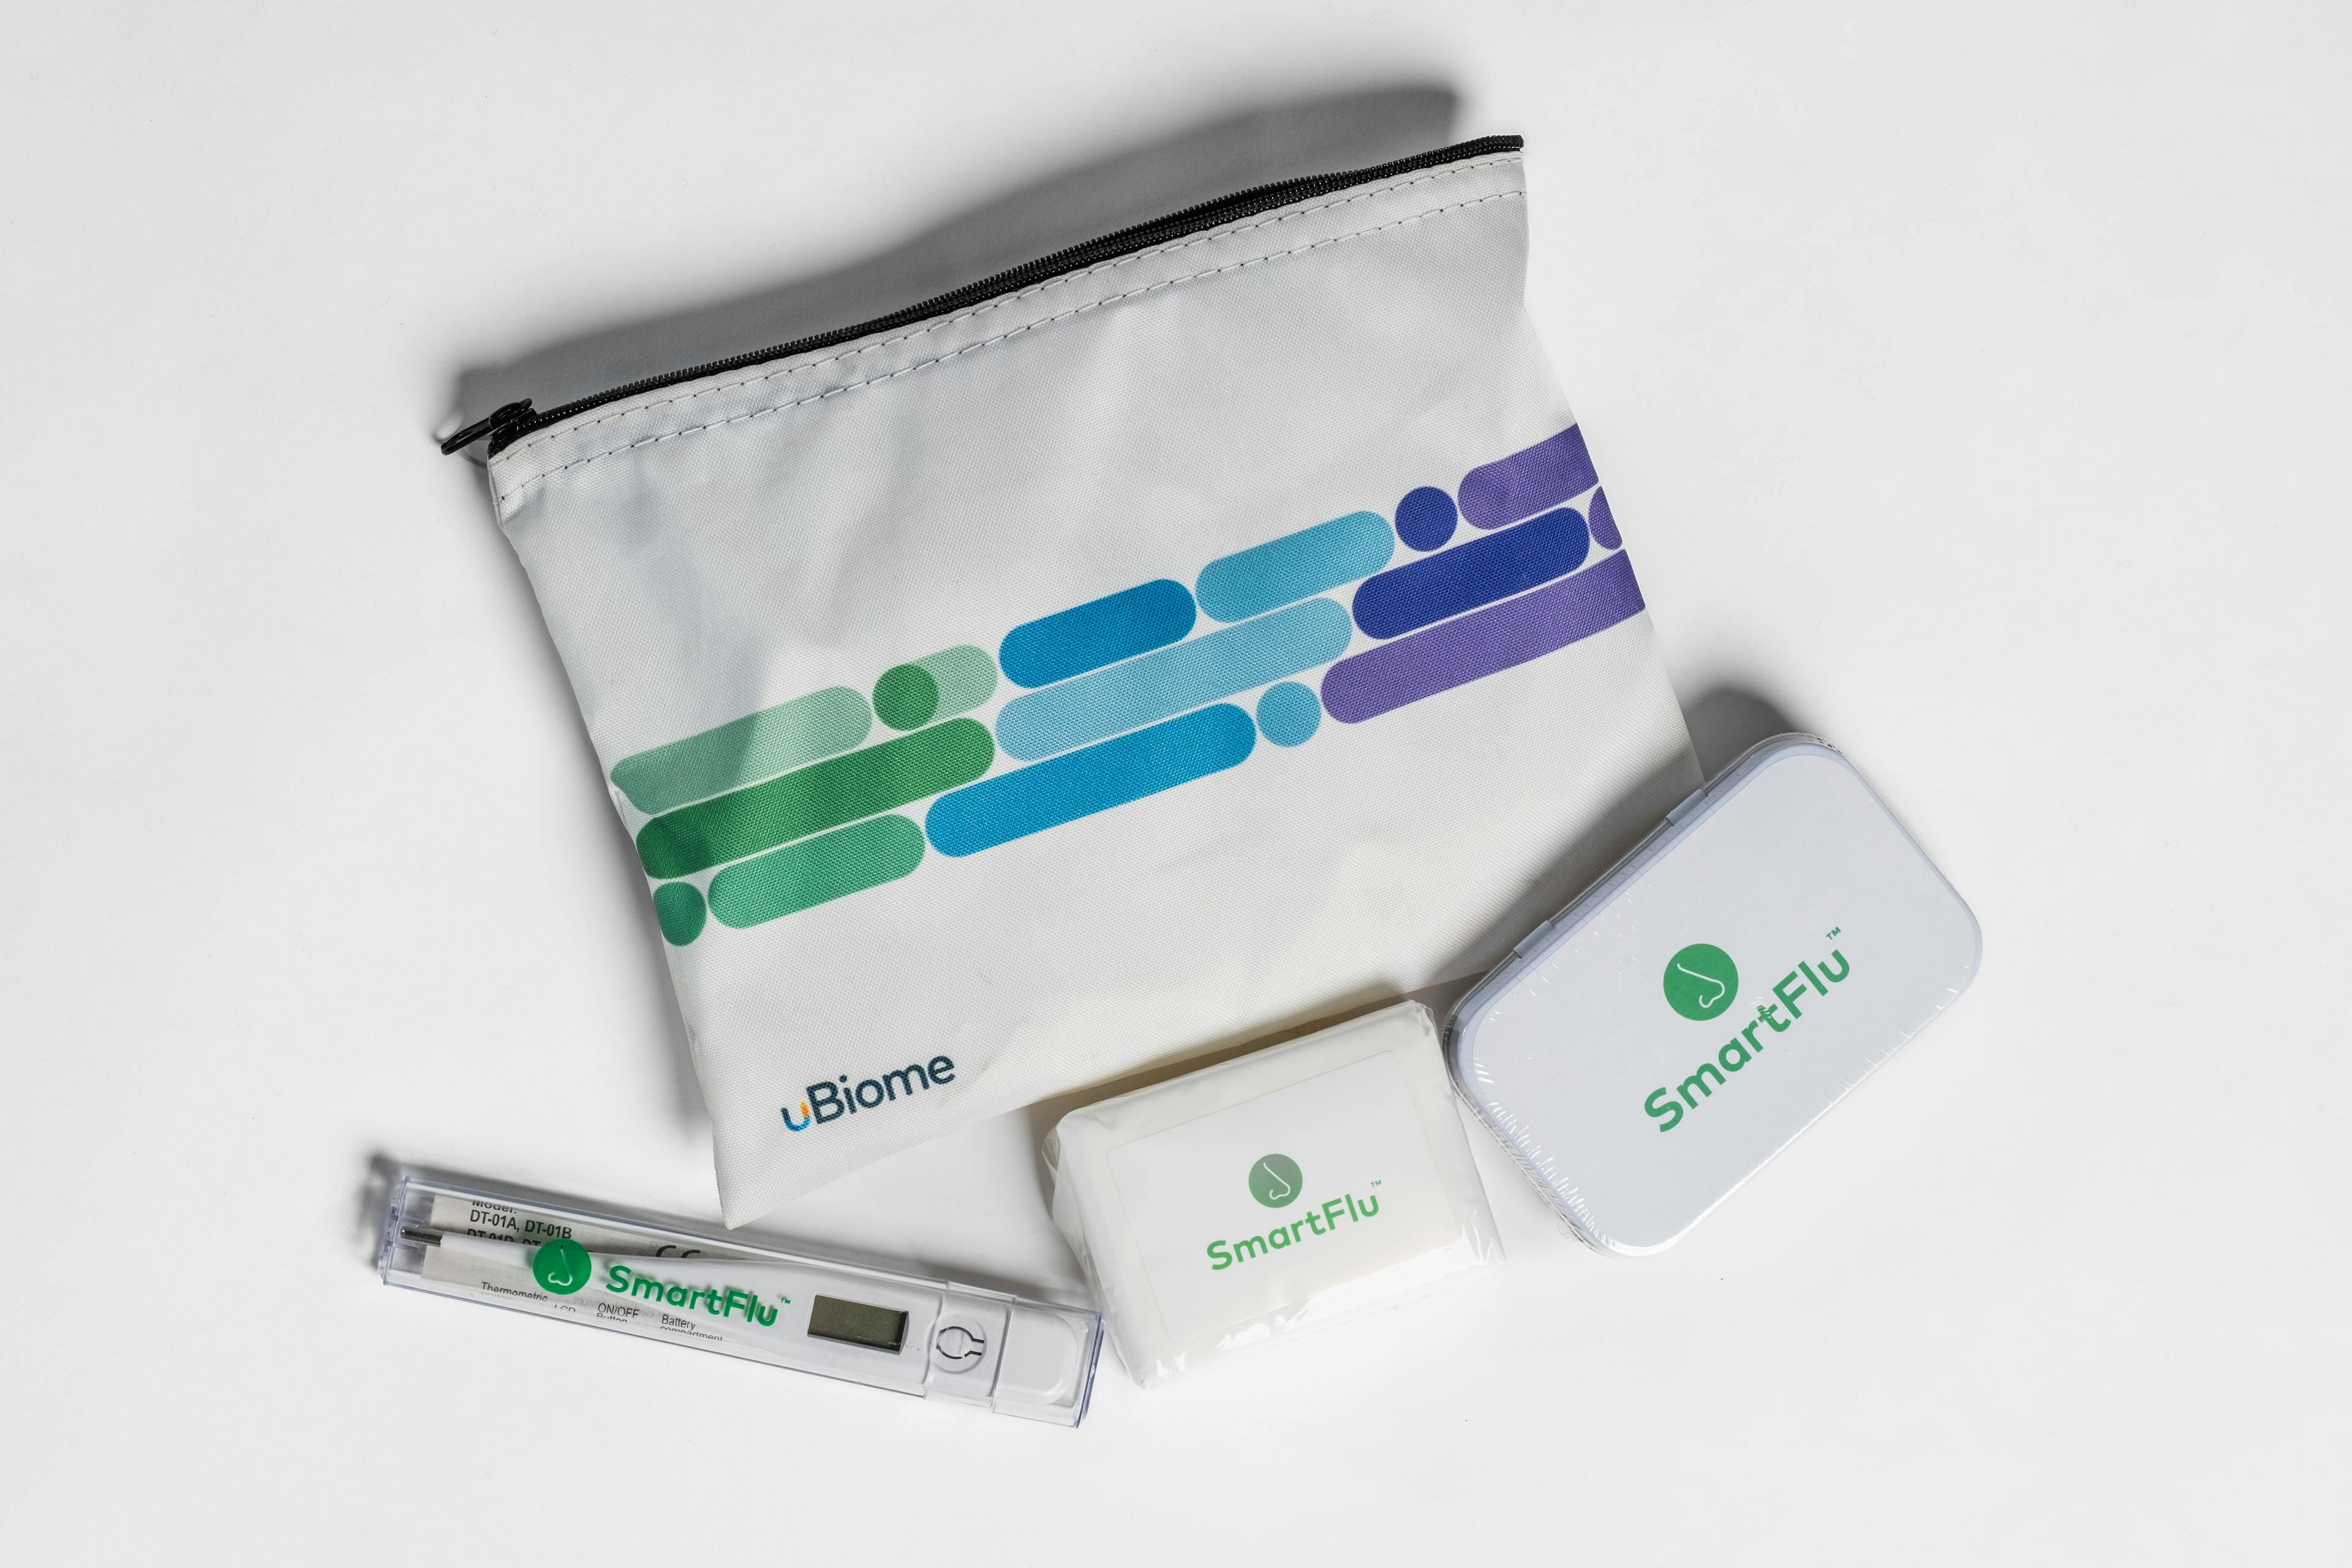 A photograph of a uBiome kit